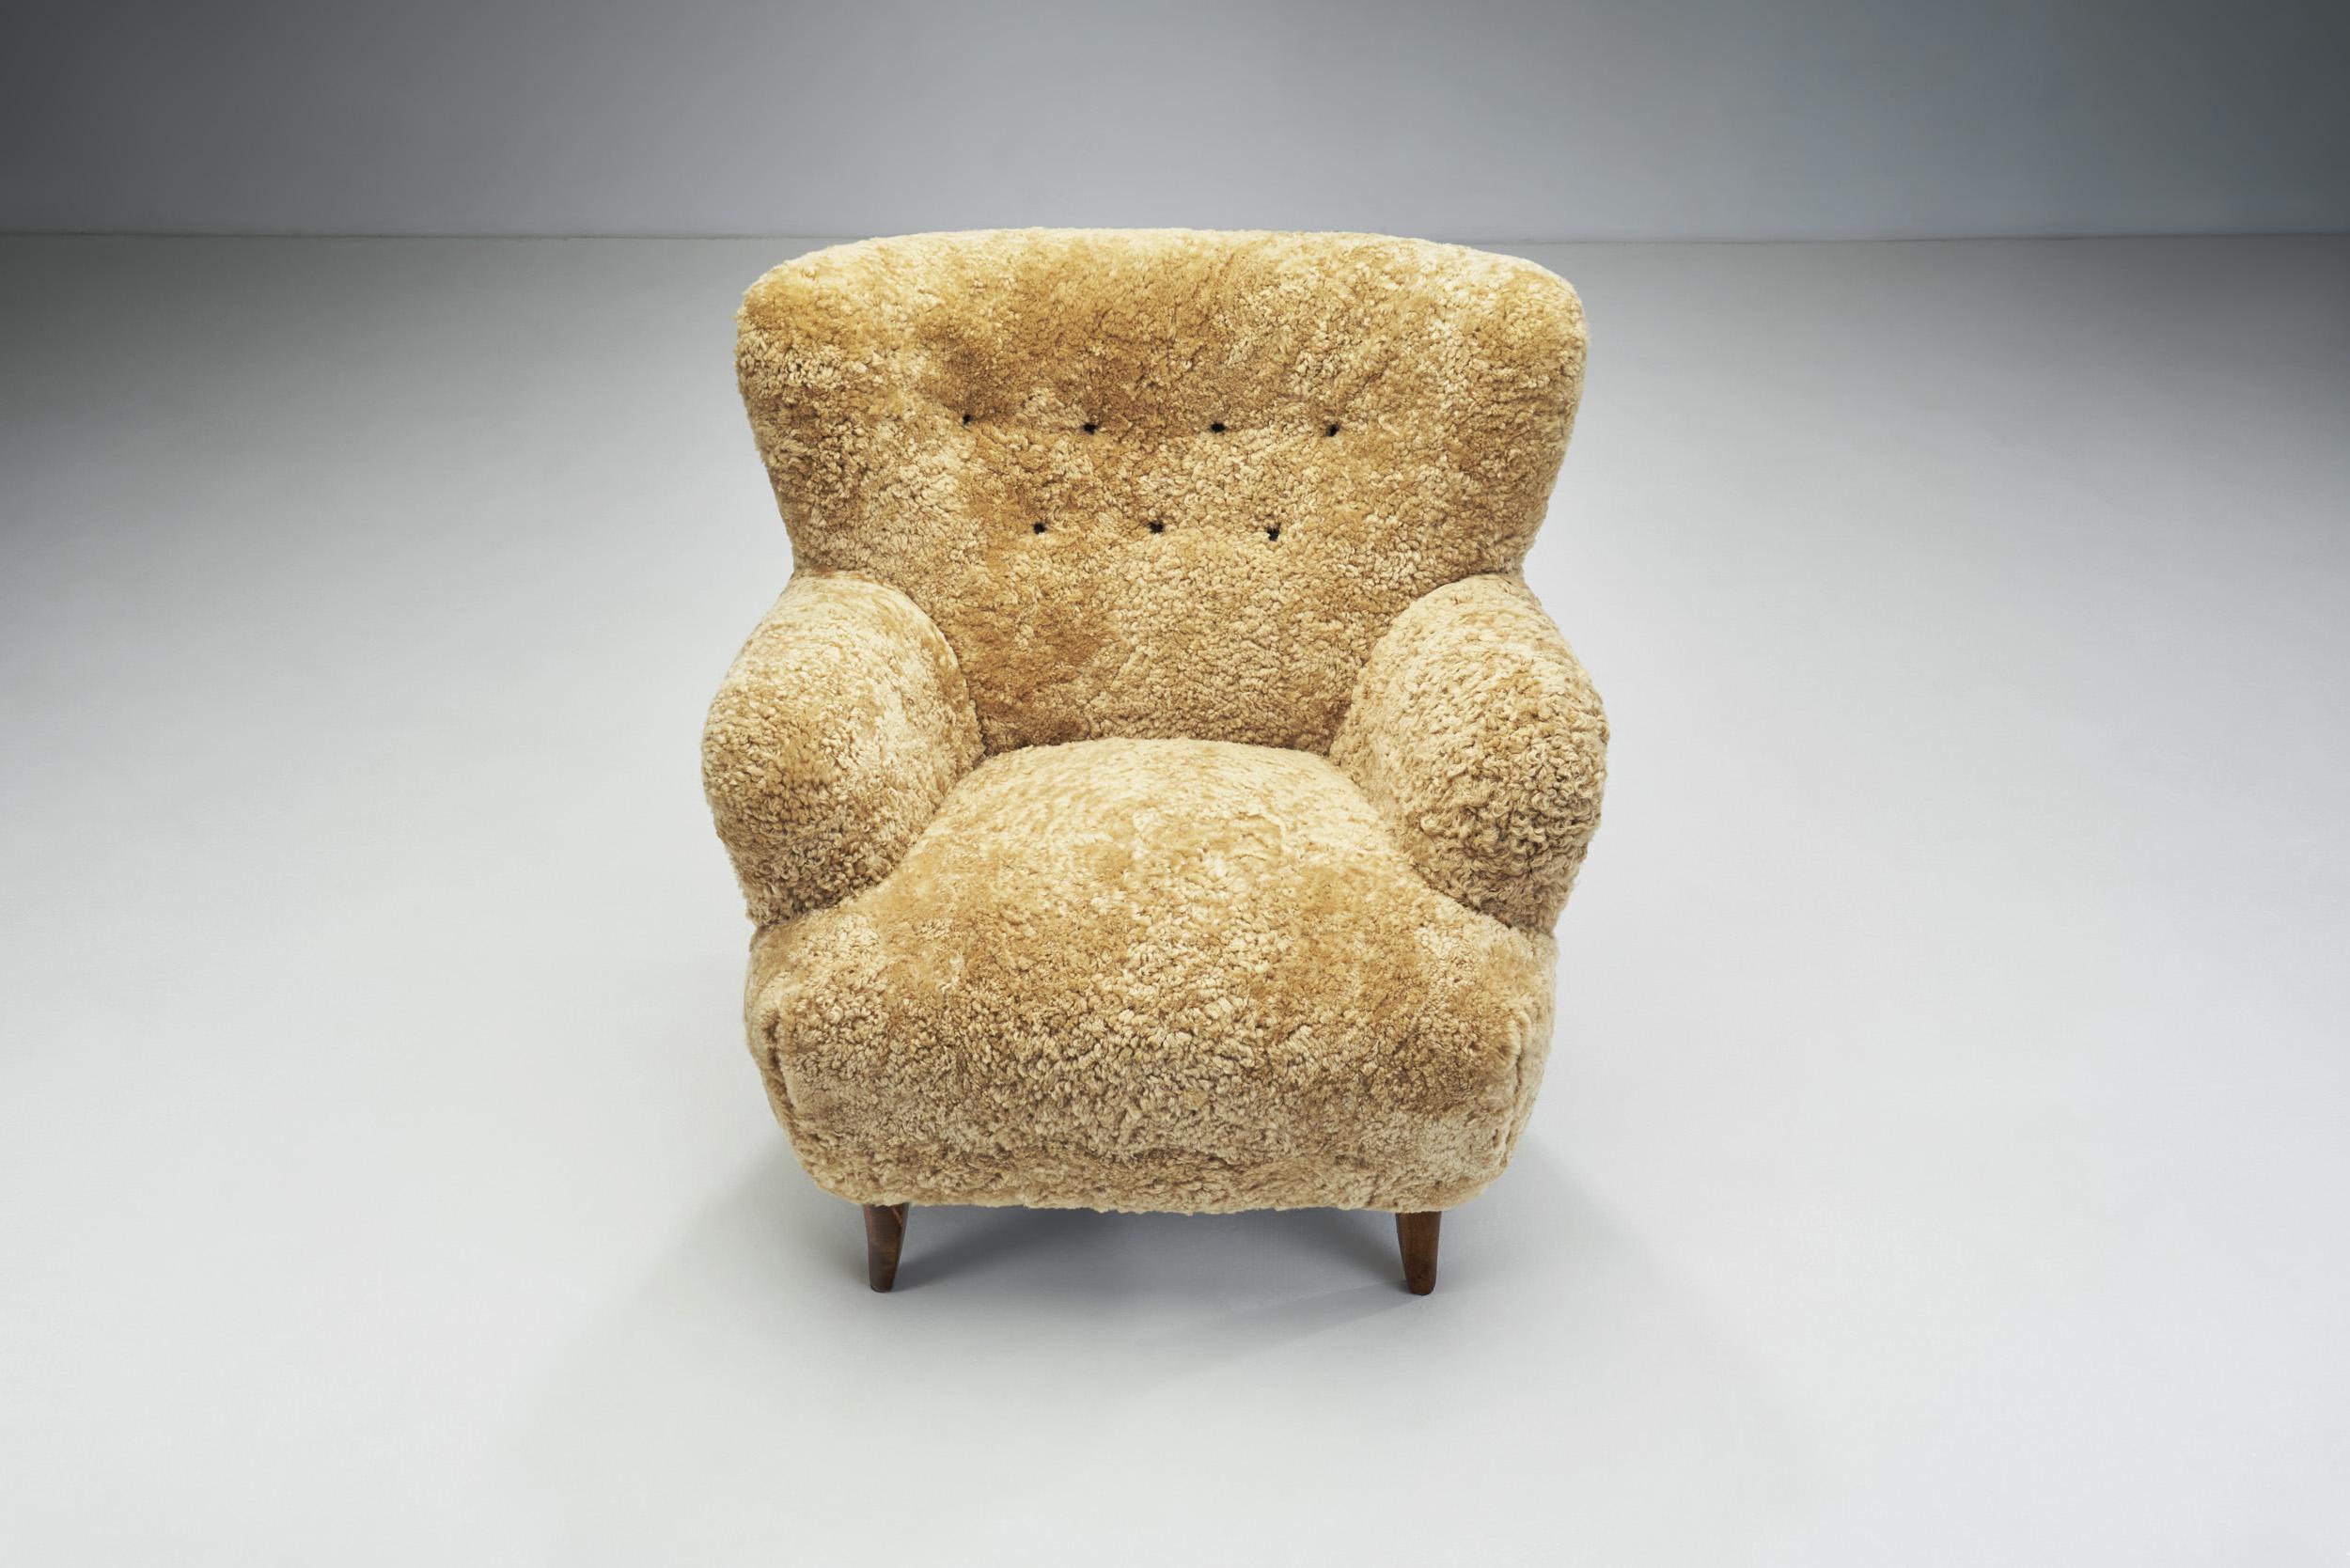 Mid-20th Century “Laila” Armchairs in Sheepskin by Ilmari Lappalainen for Asko, Finland 1950s For Sale